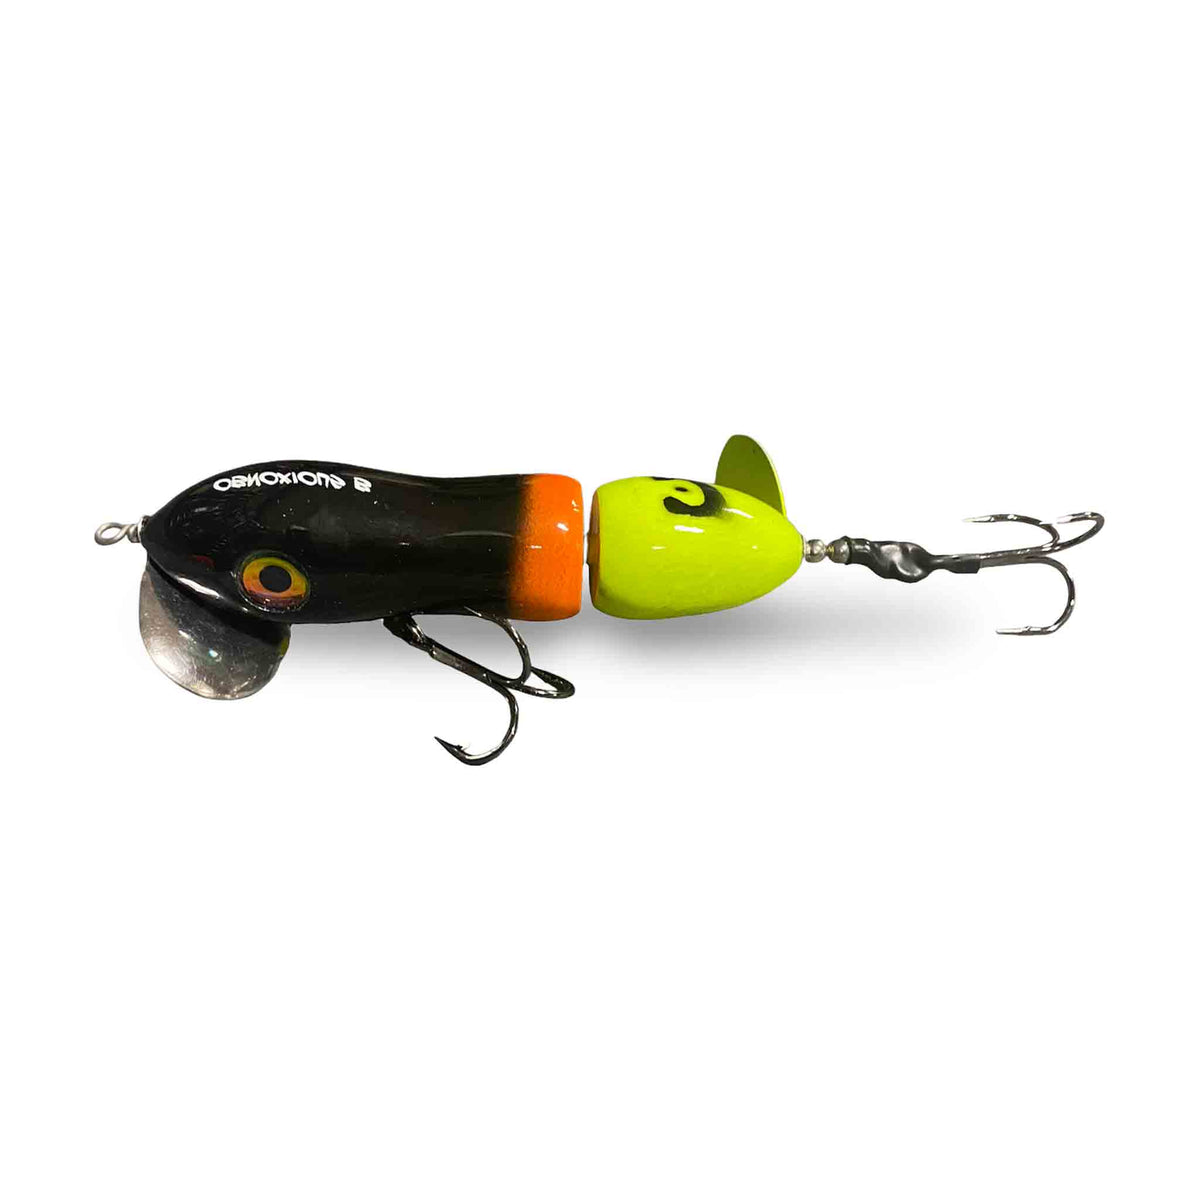 View of Topwater Big Mama Obnoxious "B" Propbait Fire Tail available at EZOKO Pike and Musky Shop